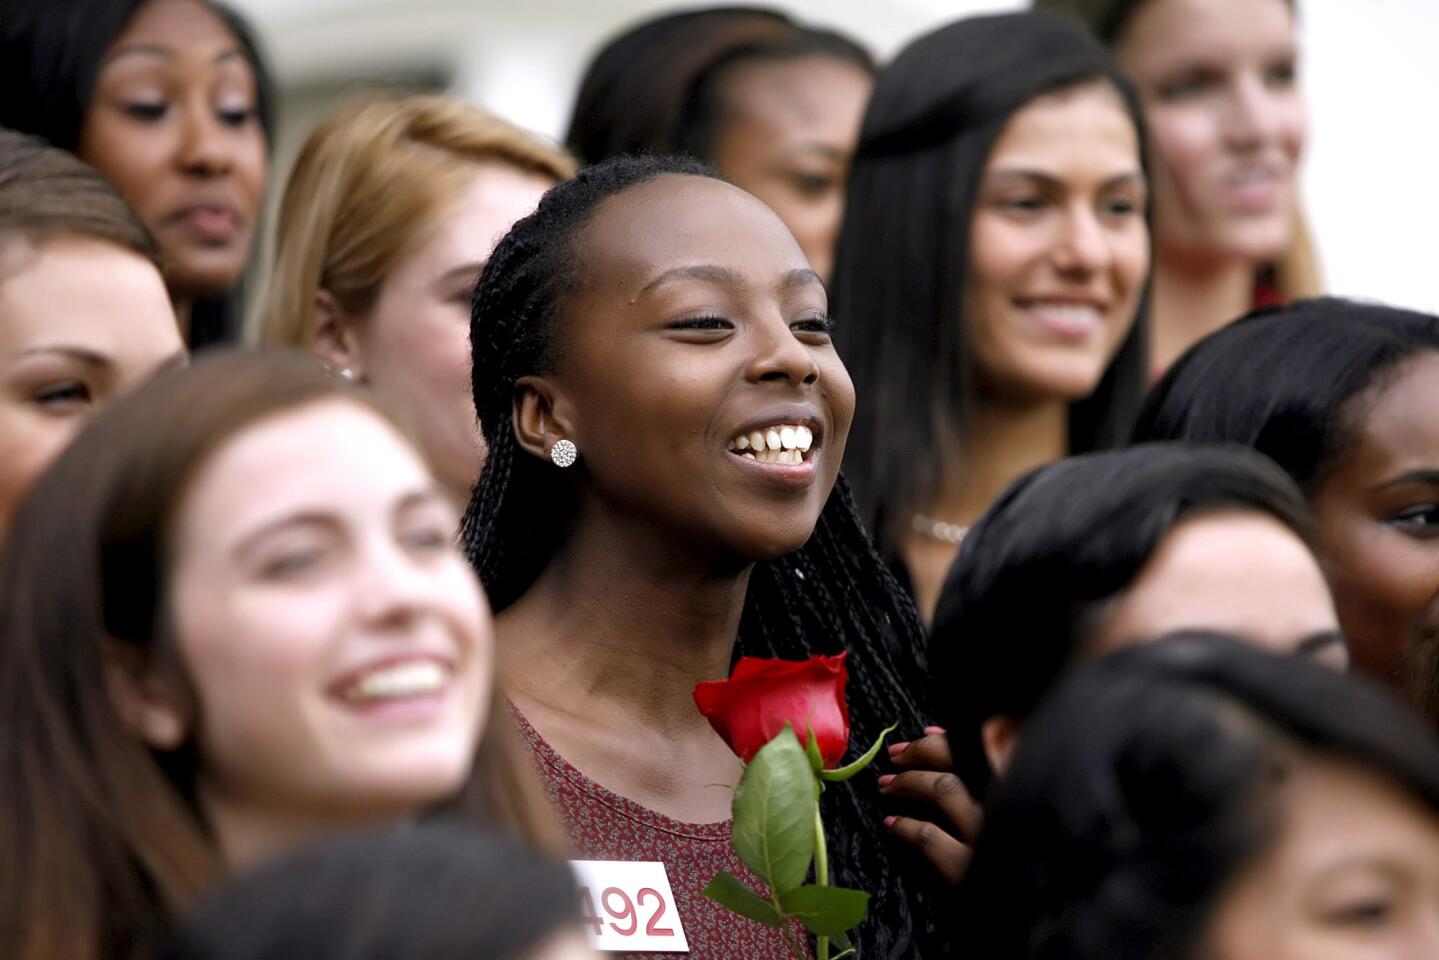 Photo Gallery: 2012 Tournament of Roses Royal Court Finalists